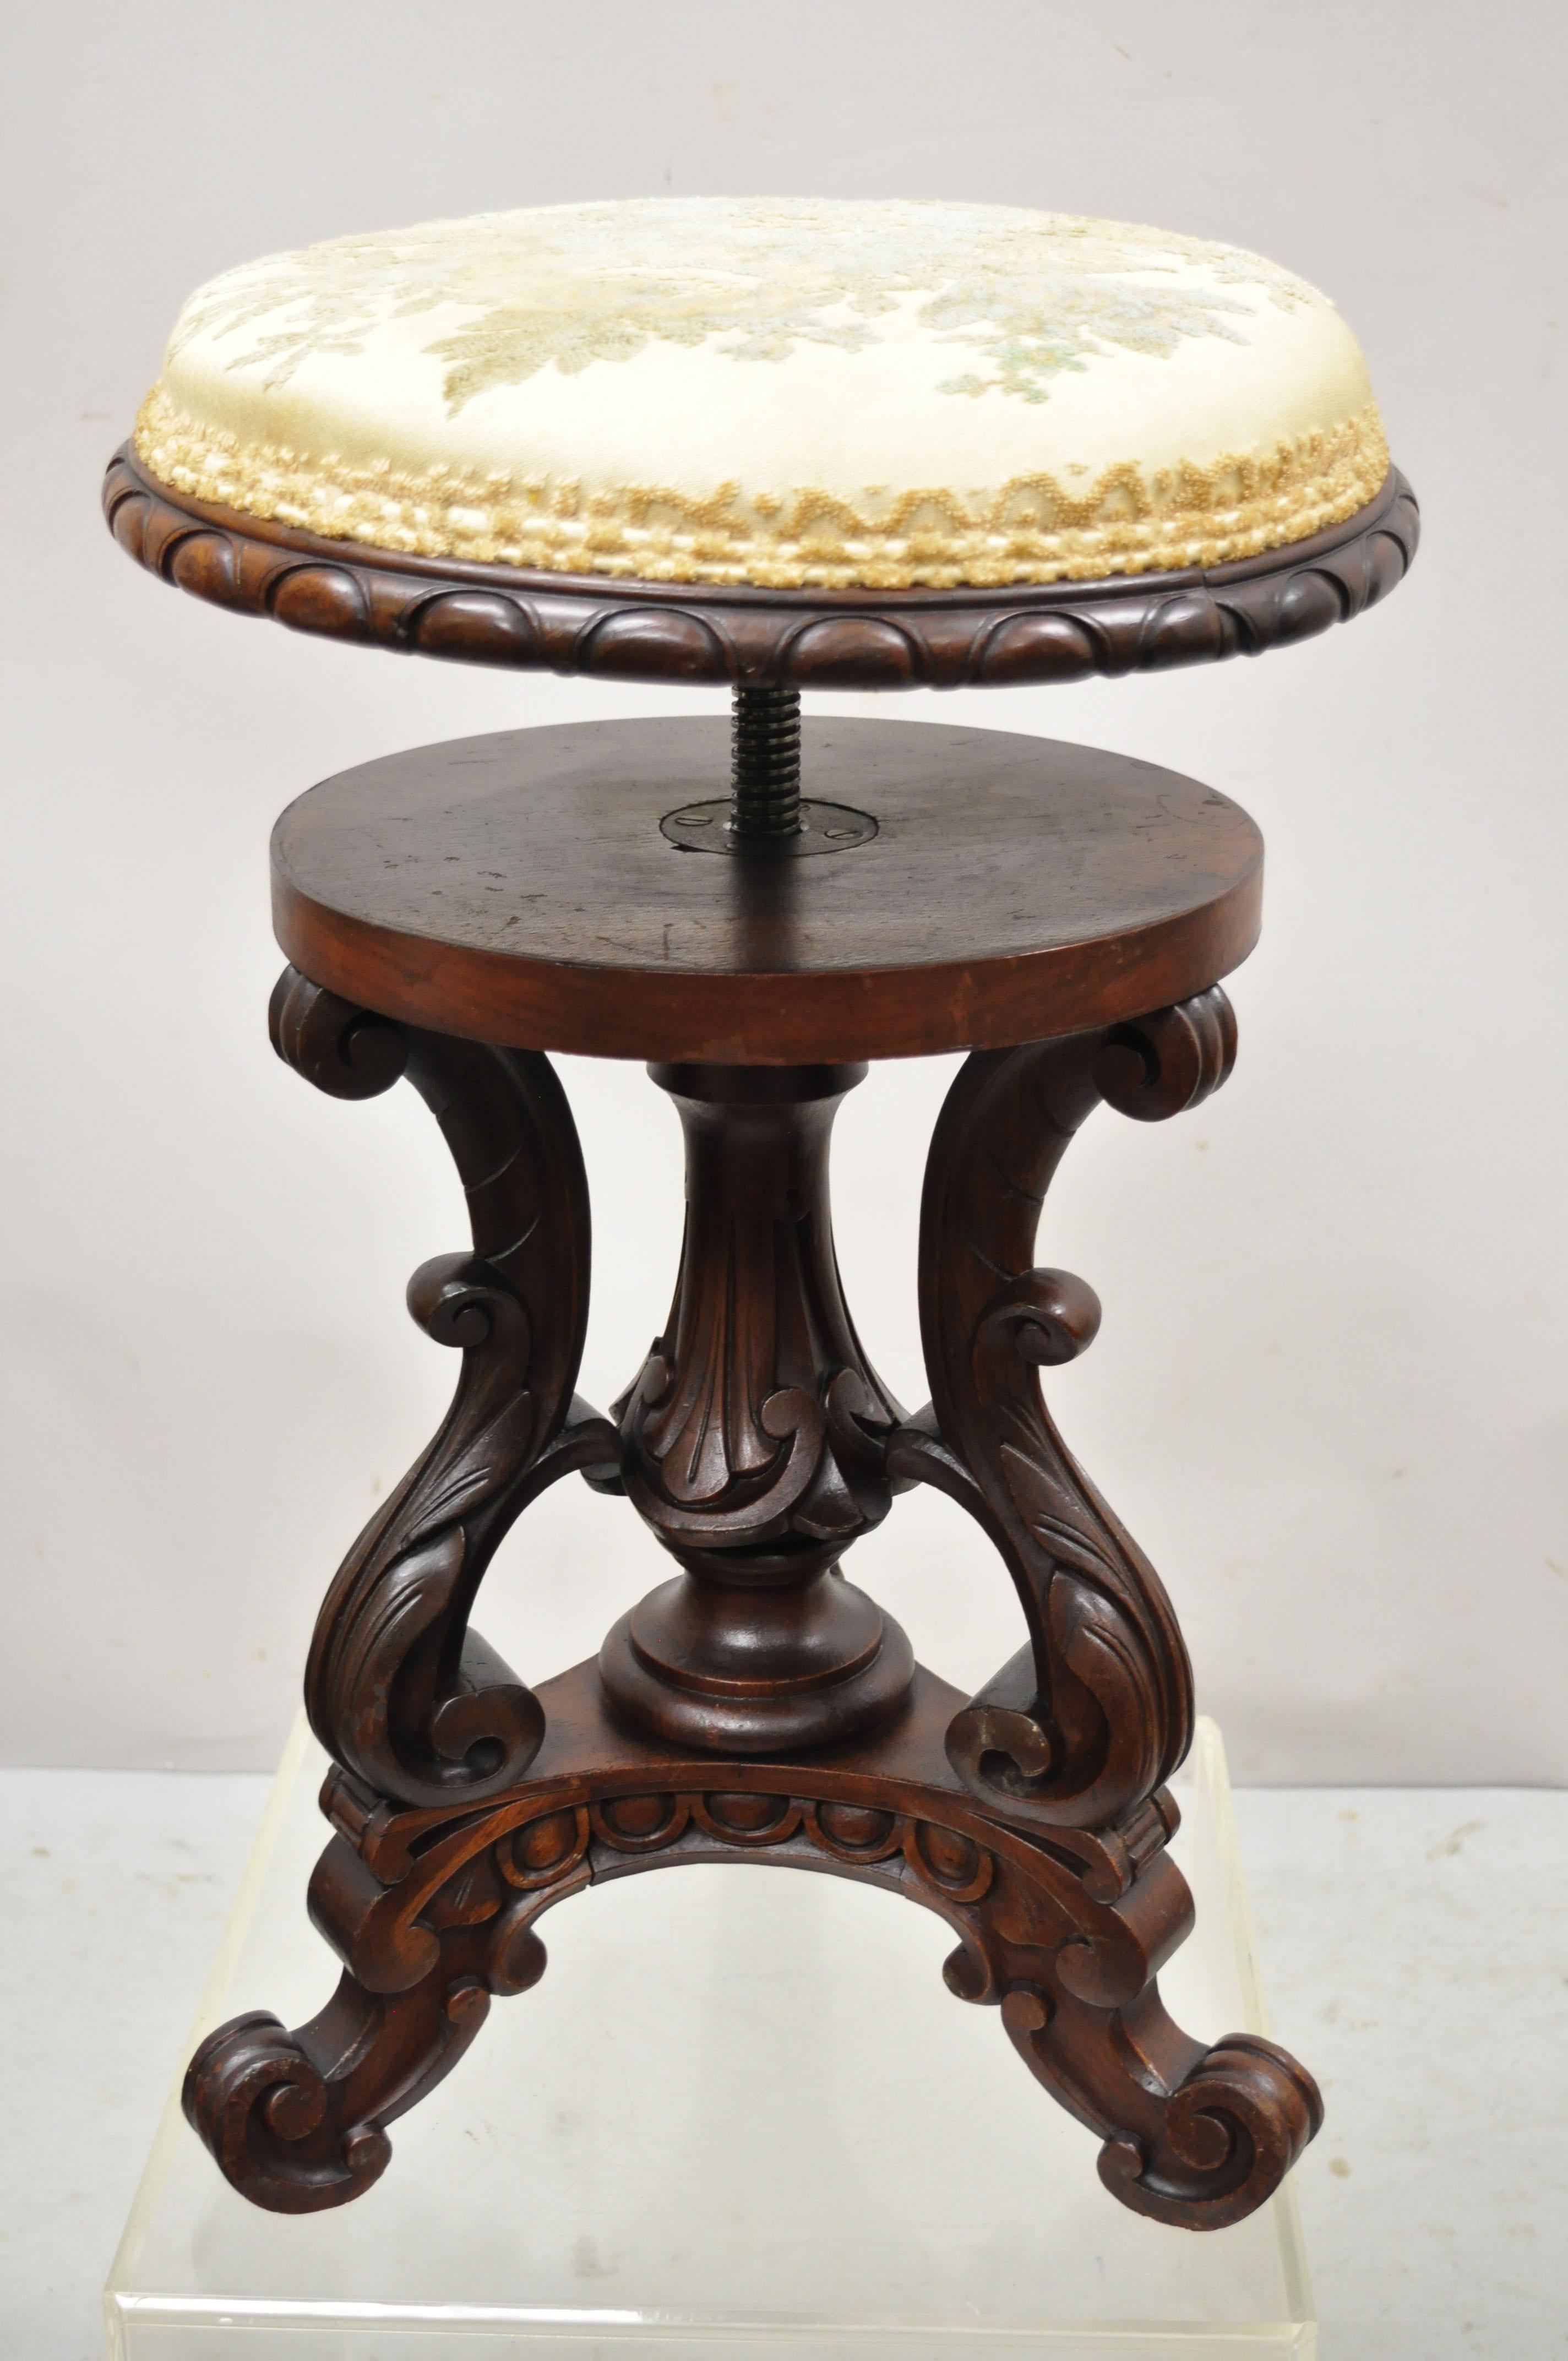 Antique 19th Century carved Walnut Victorian adjustable height pedestal base stool. Item features adjustable height seat, solid wood frame, nicely carved details, very nice antique item, quality craftsmanship, great style and form. Circa 19th